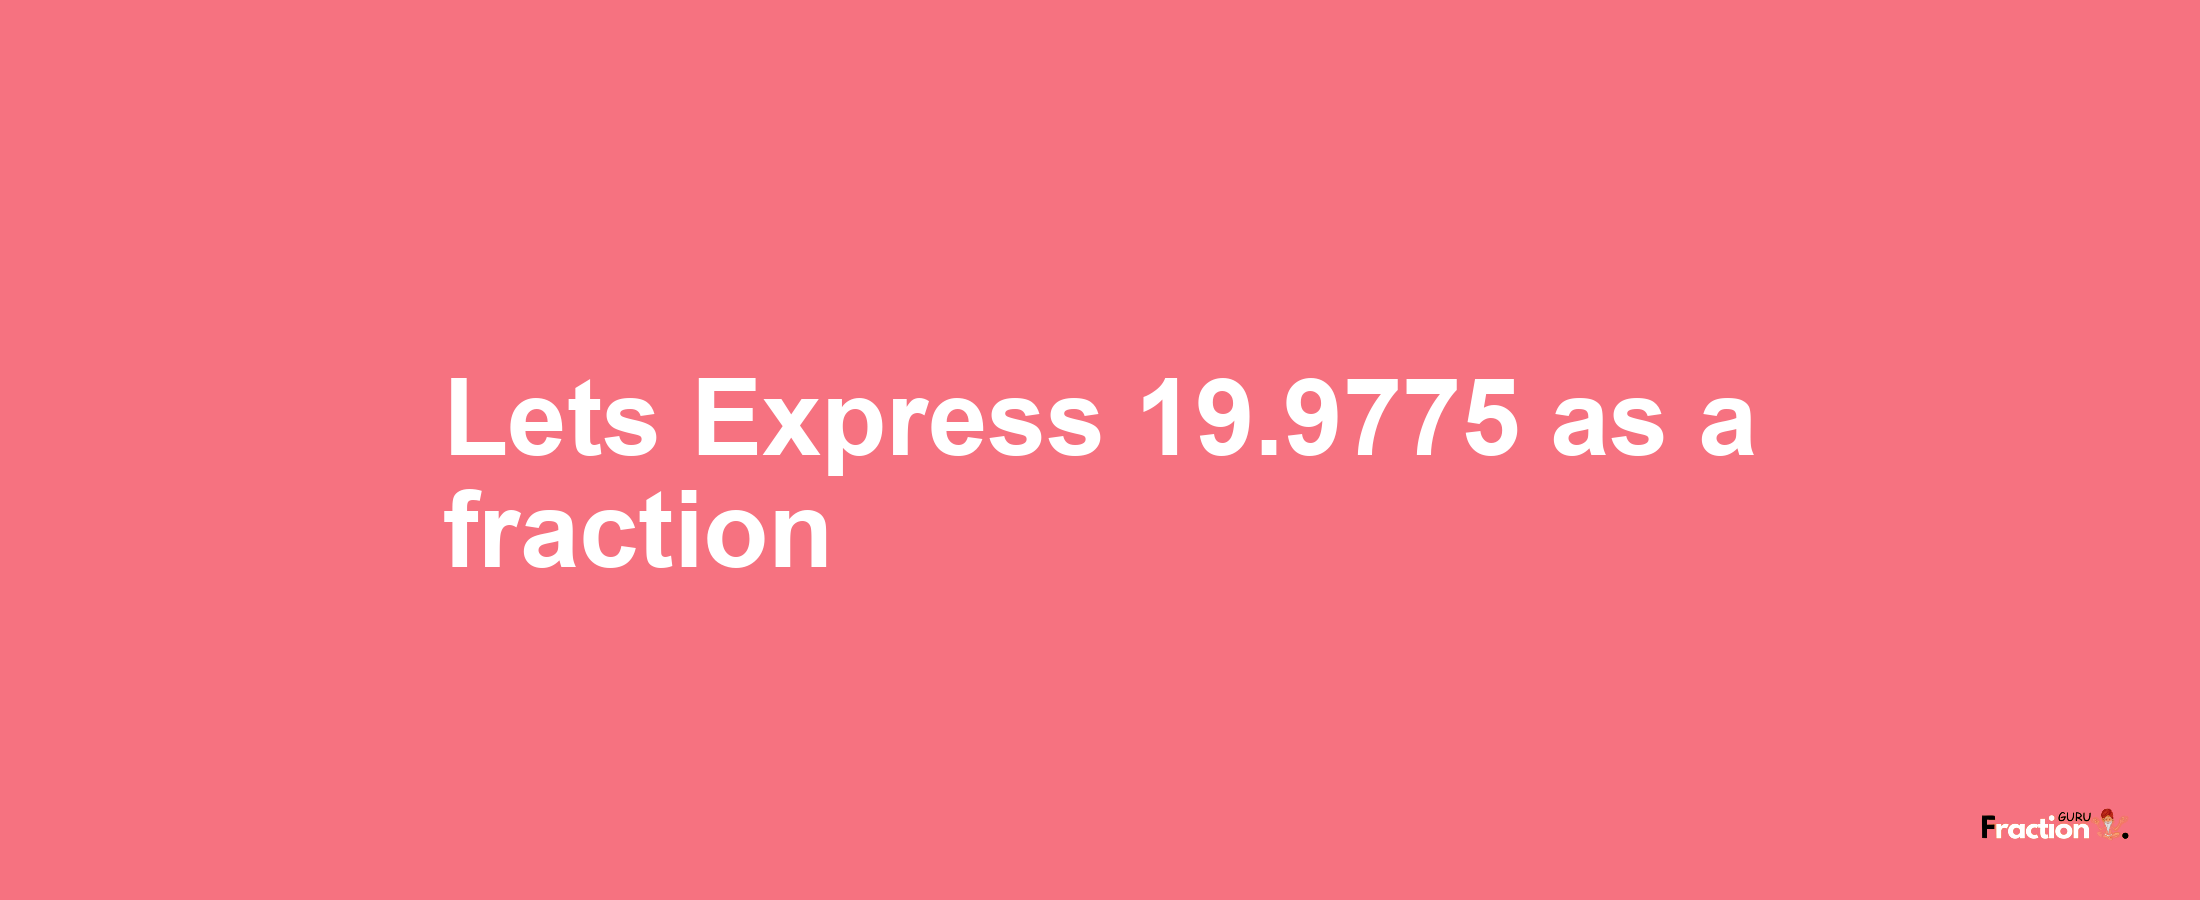 Lets Express 19.9775 as afraction